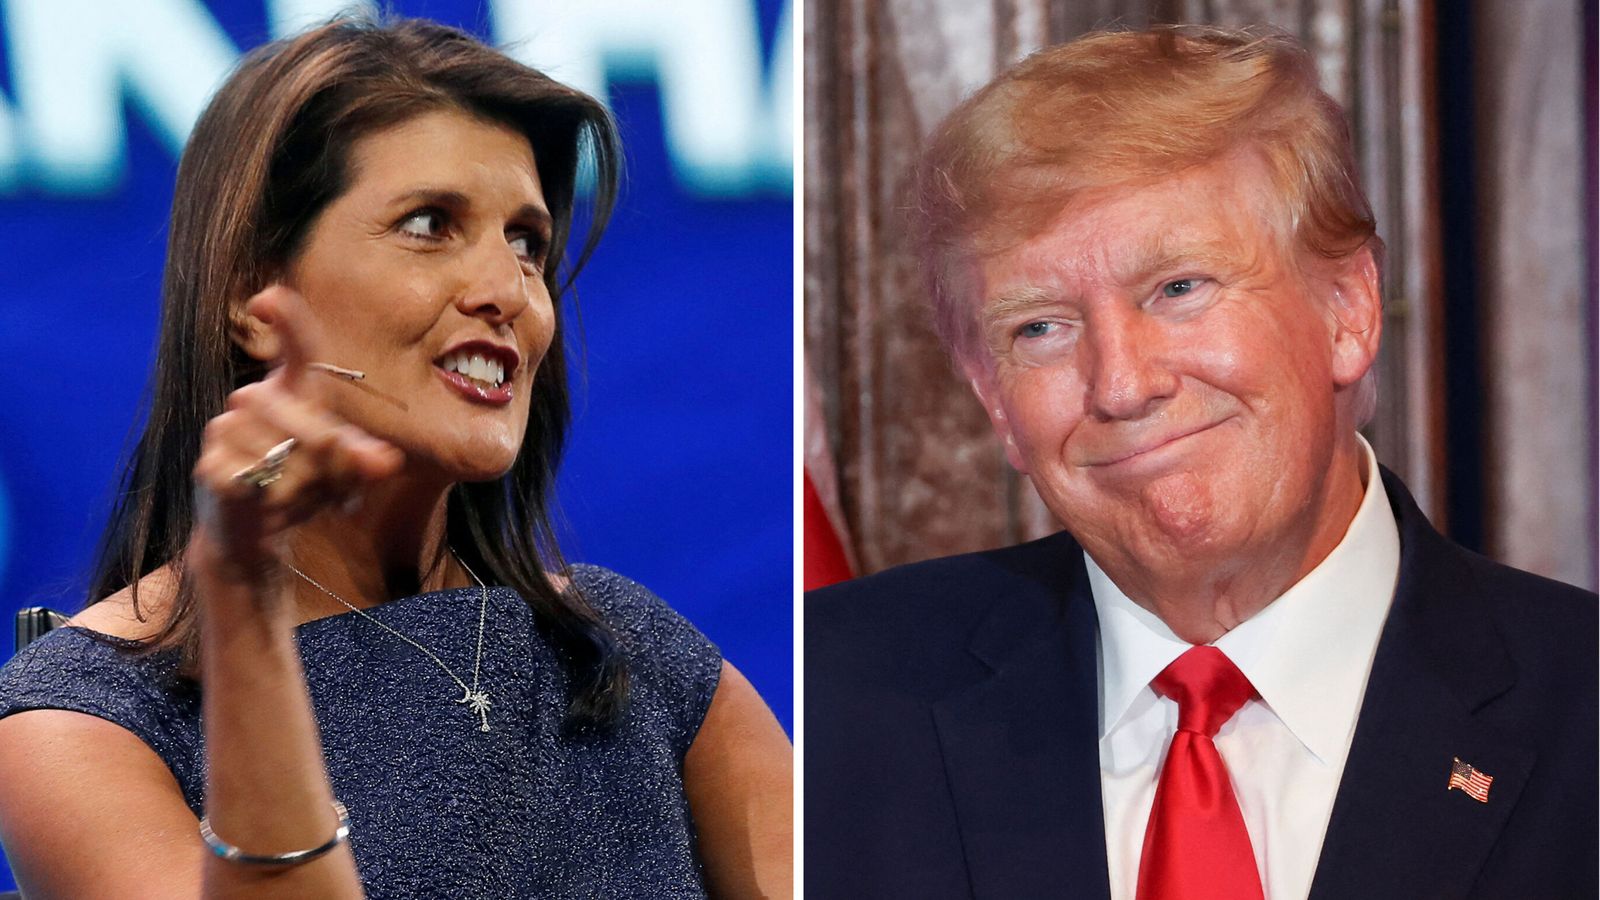 Nikki Haley to challenge Donald Trump for 2024 Republican presidential nomination